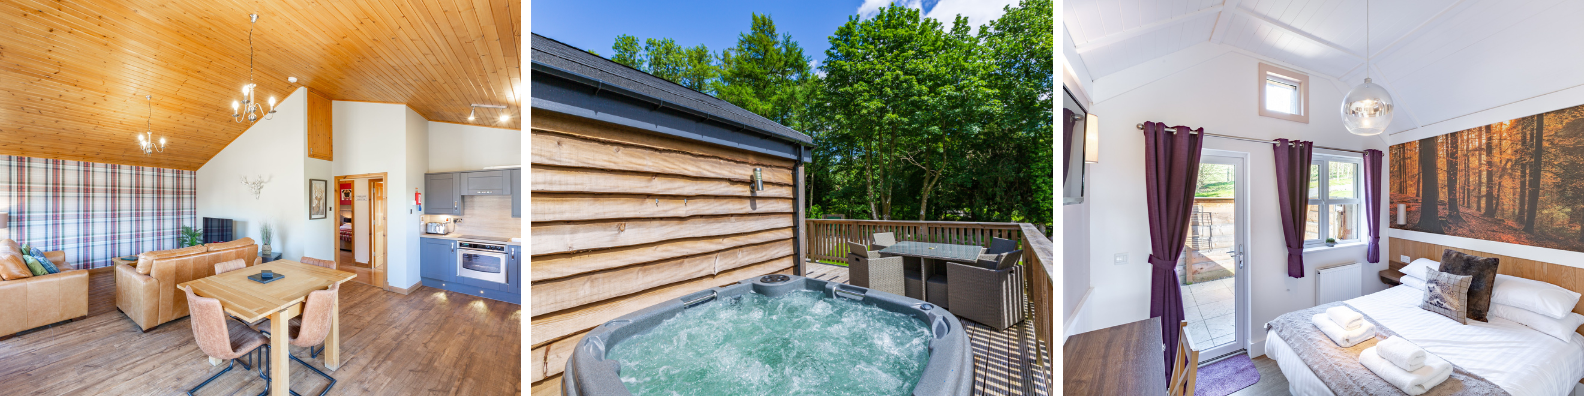 3 Nights for the Price of 2 in our lodges